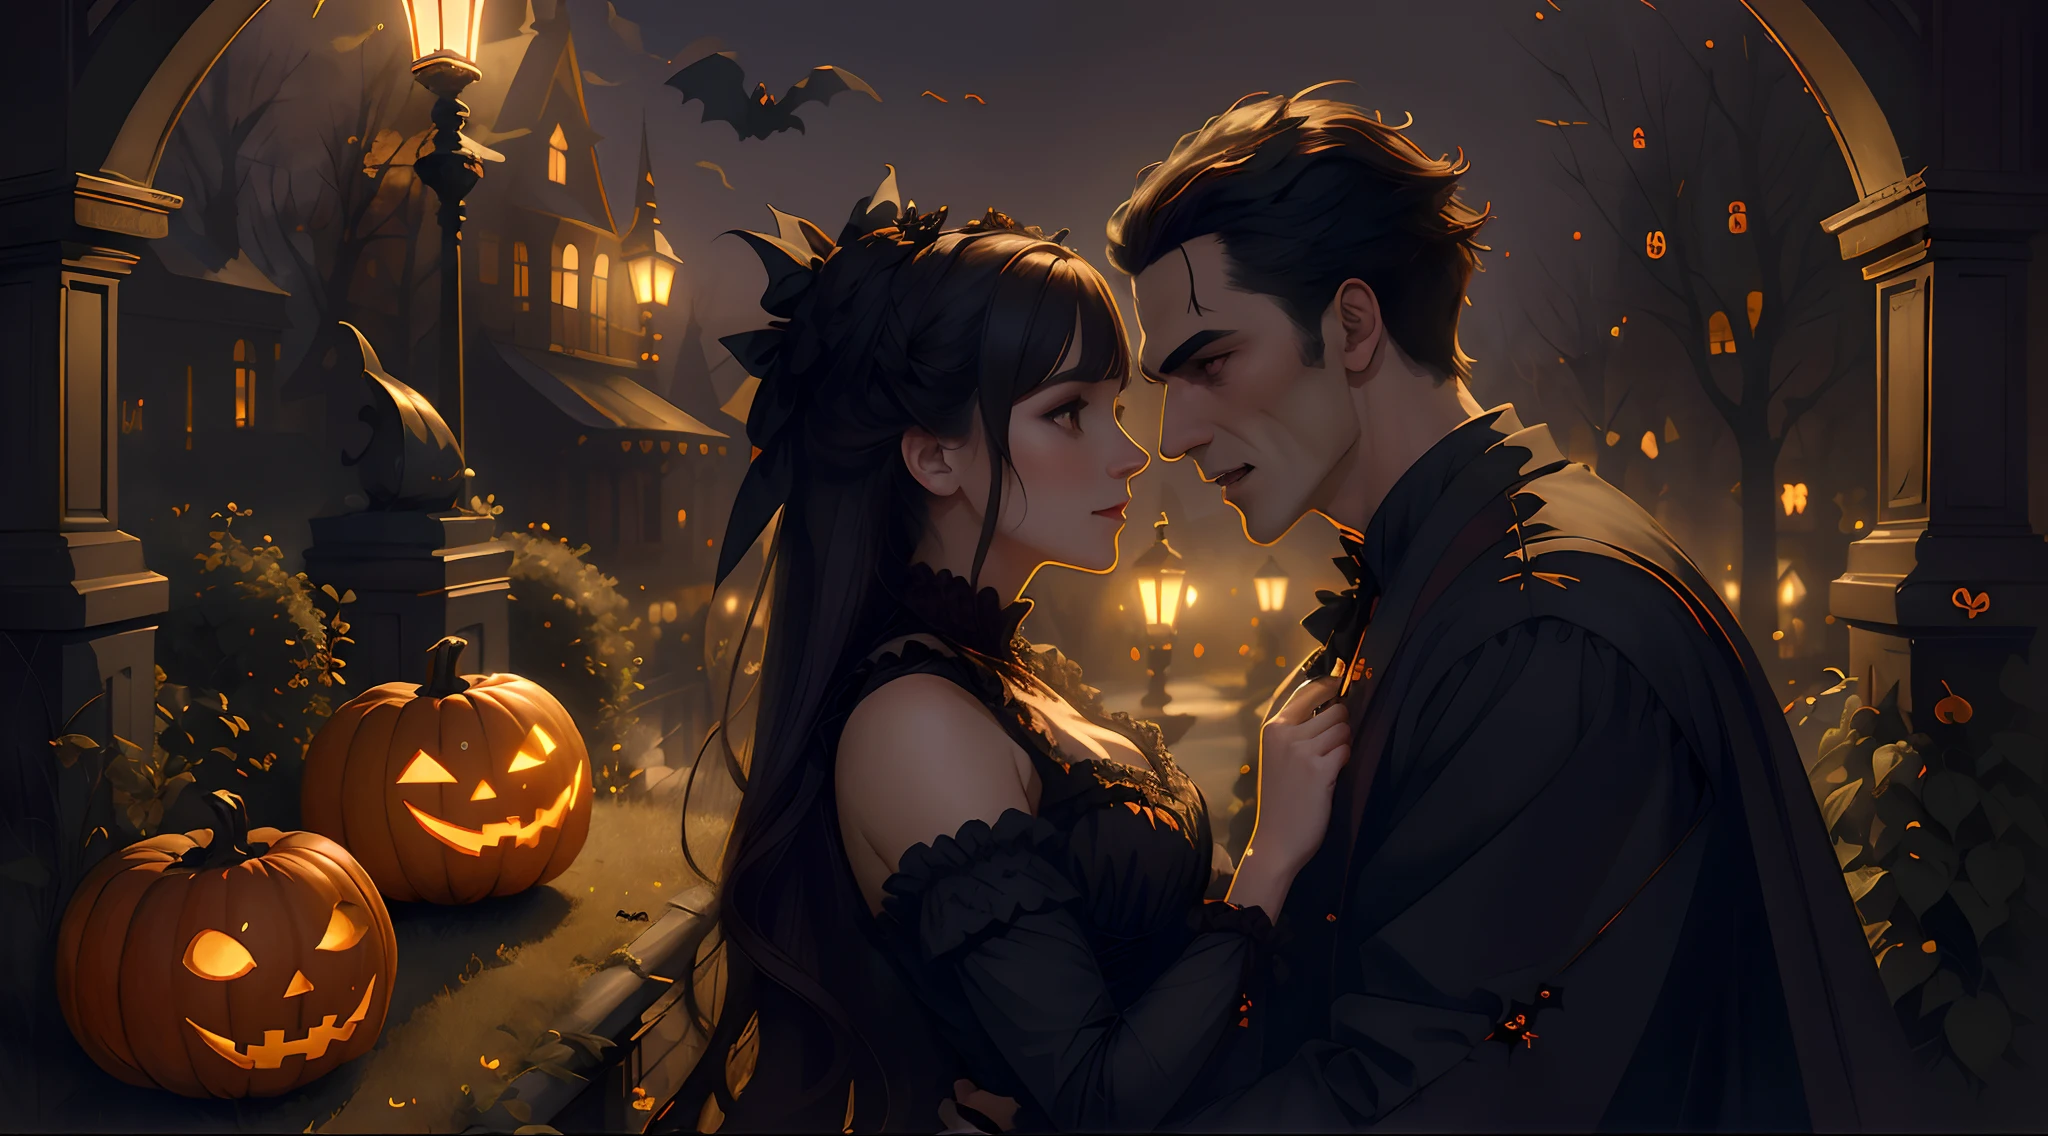 (masterpiece), (((highest quality)), (hightly detailed), create a cute Halloween Illustration of two vampires in love, epic artwork, high illumination, neo victorian, magical aura